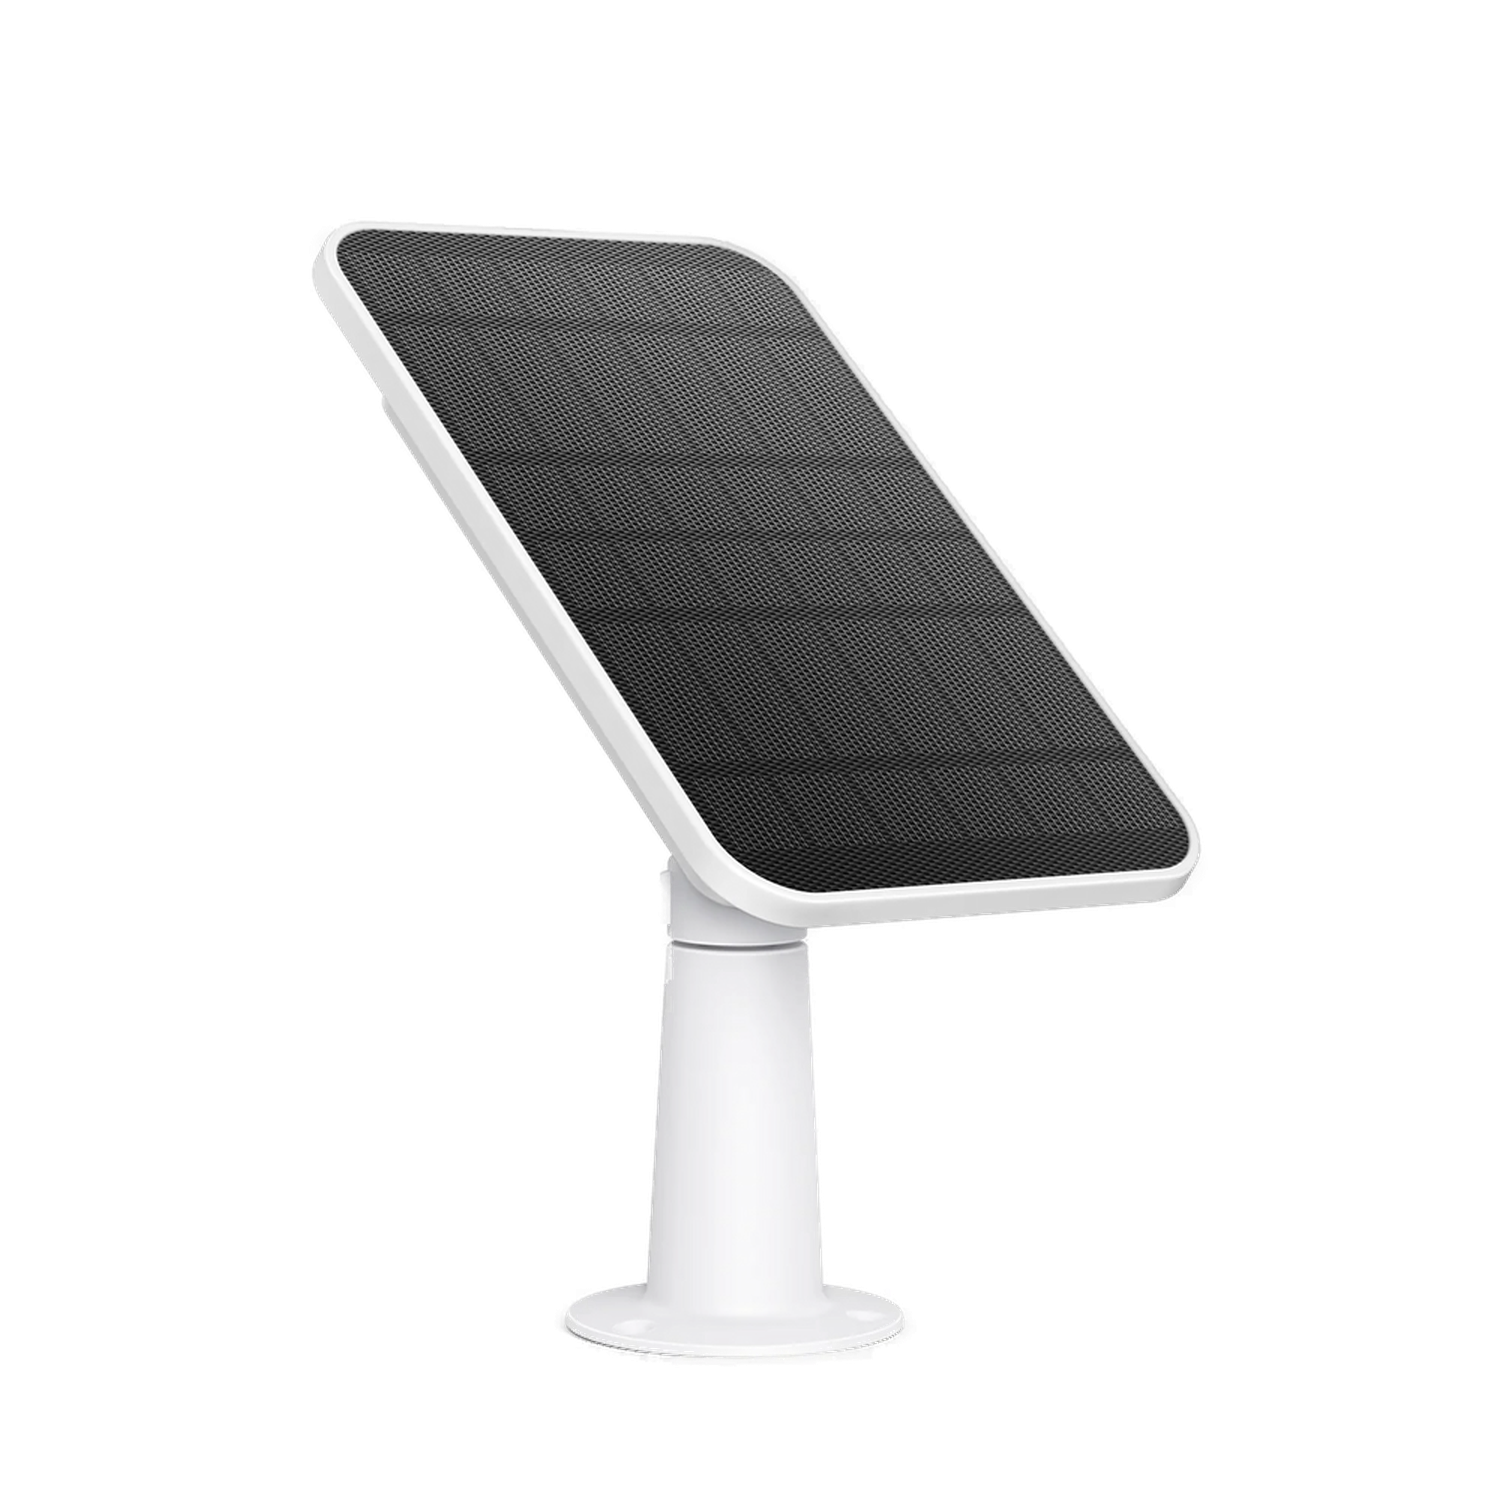 Solar Panel Charger(4 Pack)